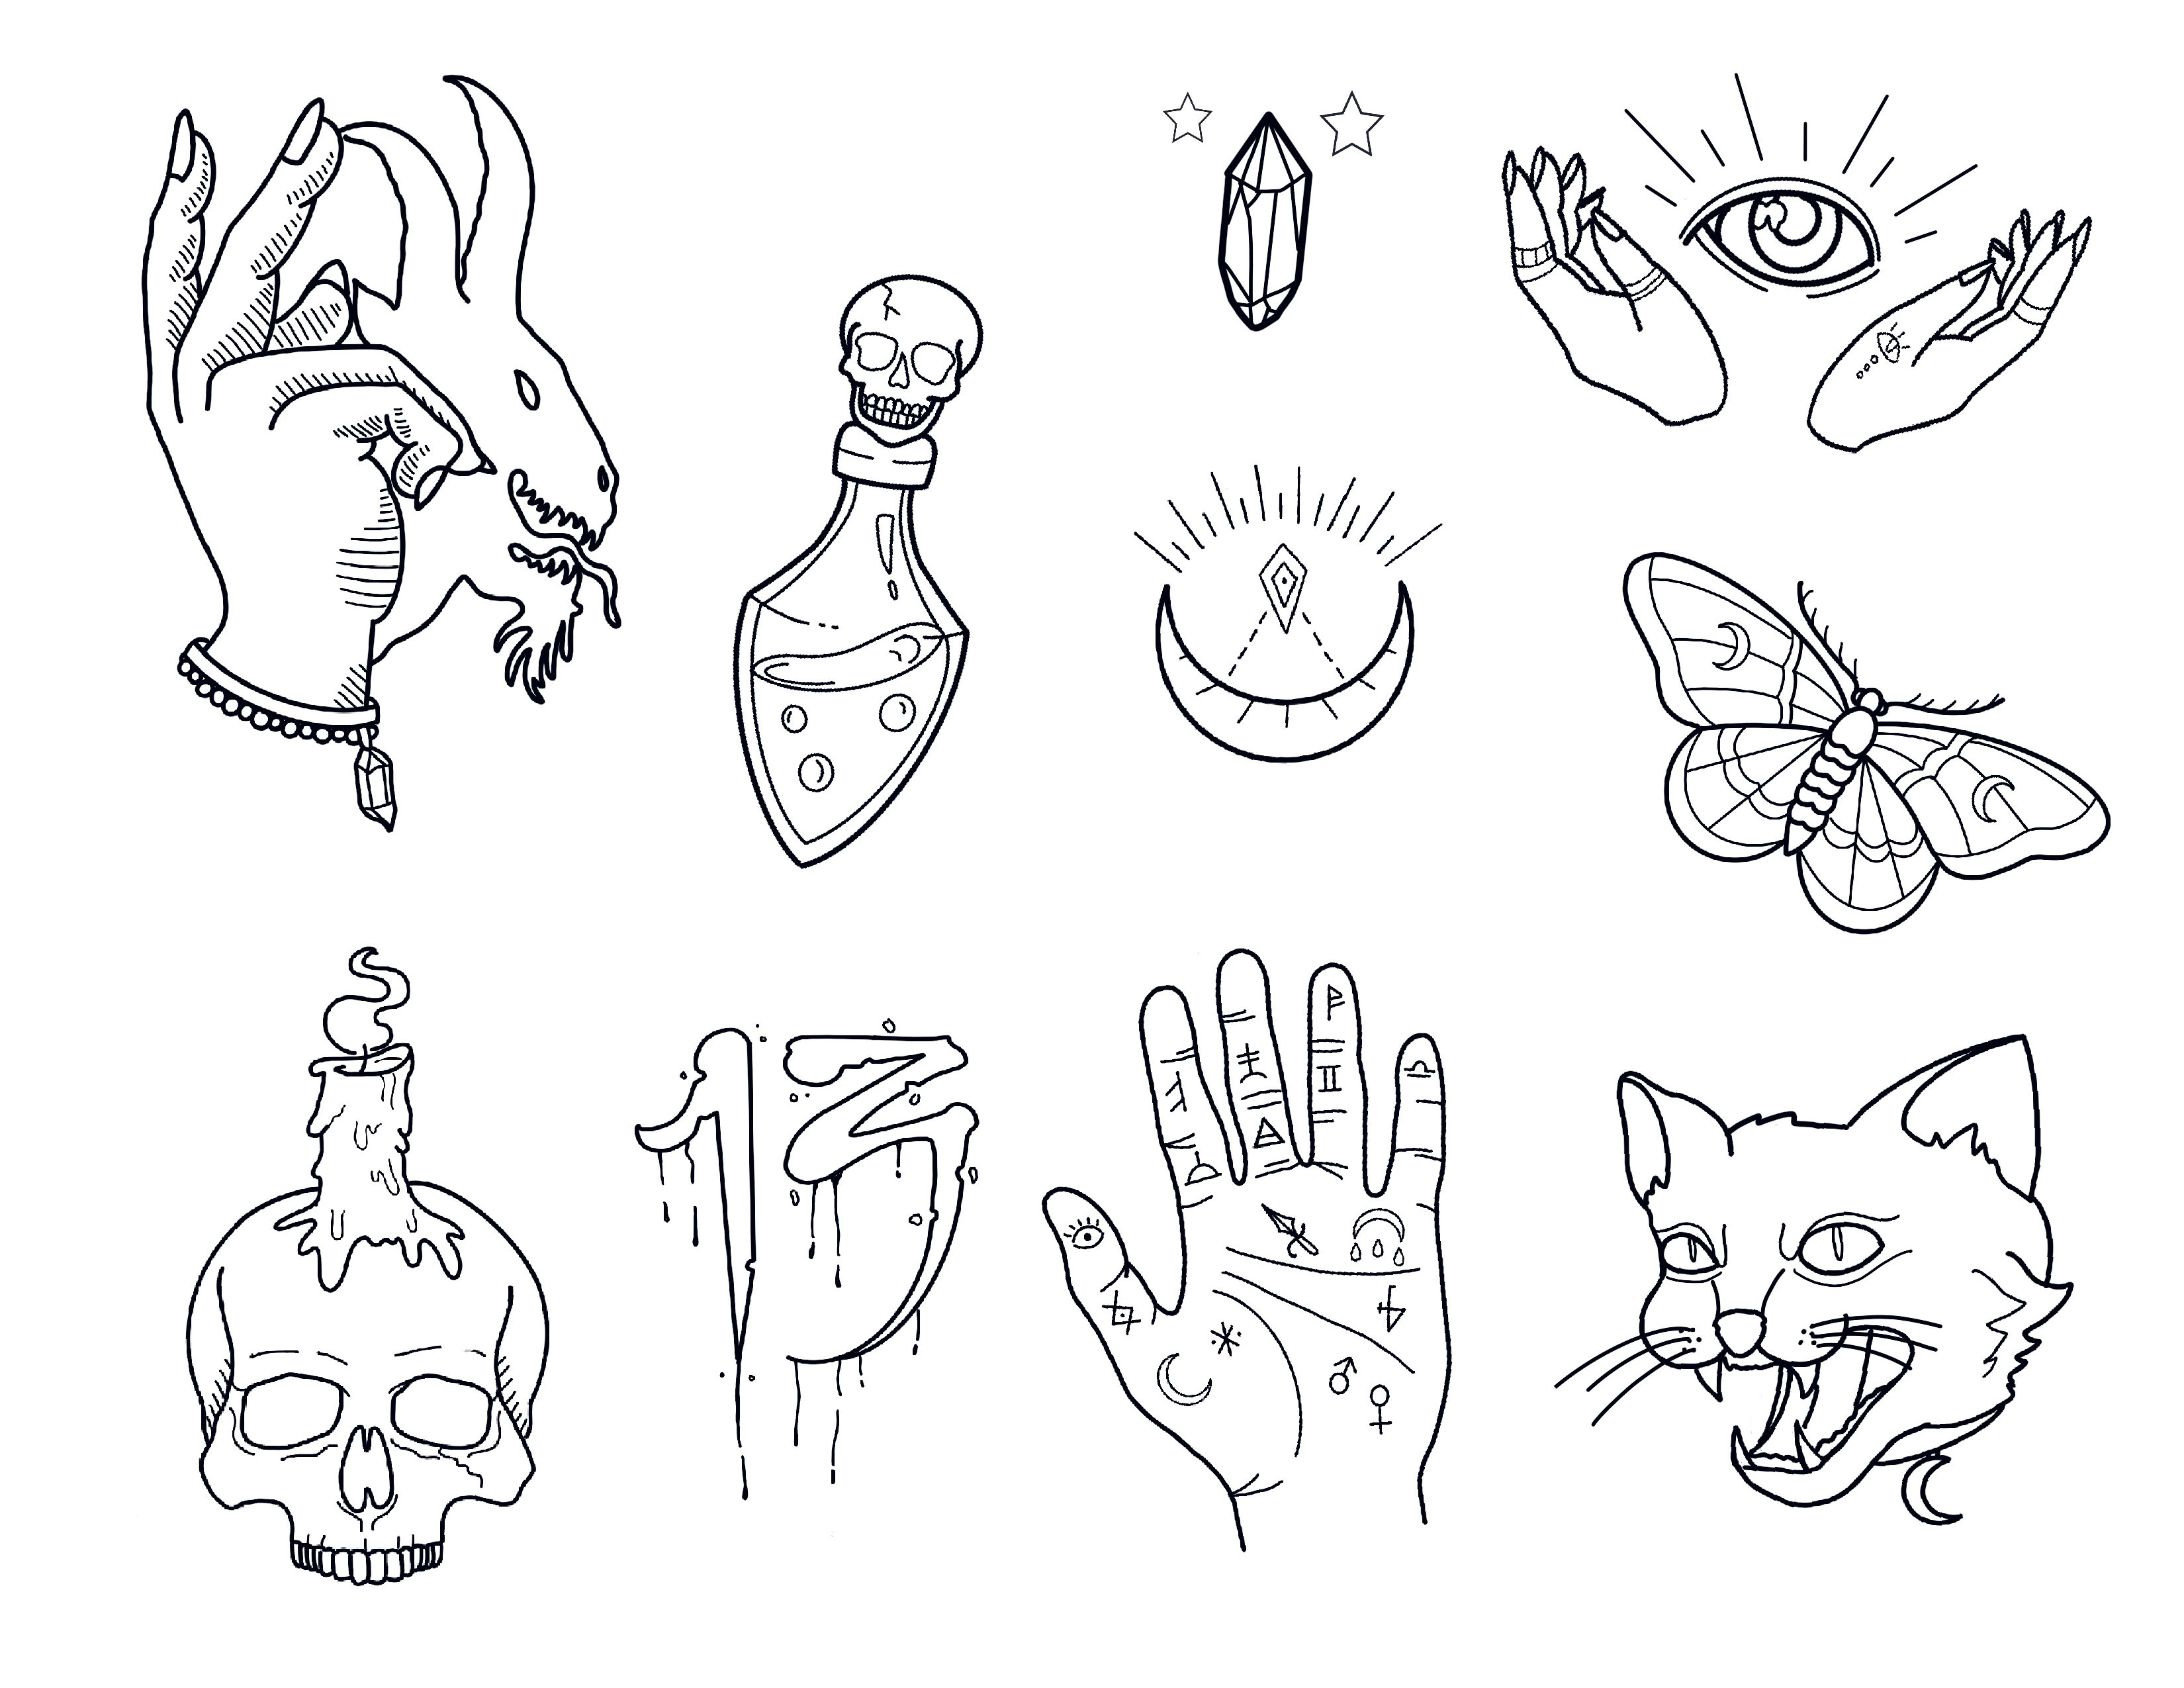 6 Drawing Exercises For Tattoo Artists To Improve Skills